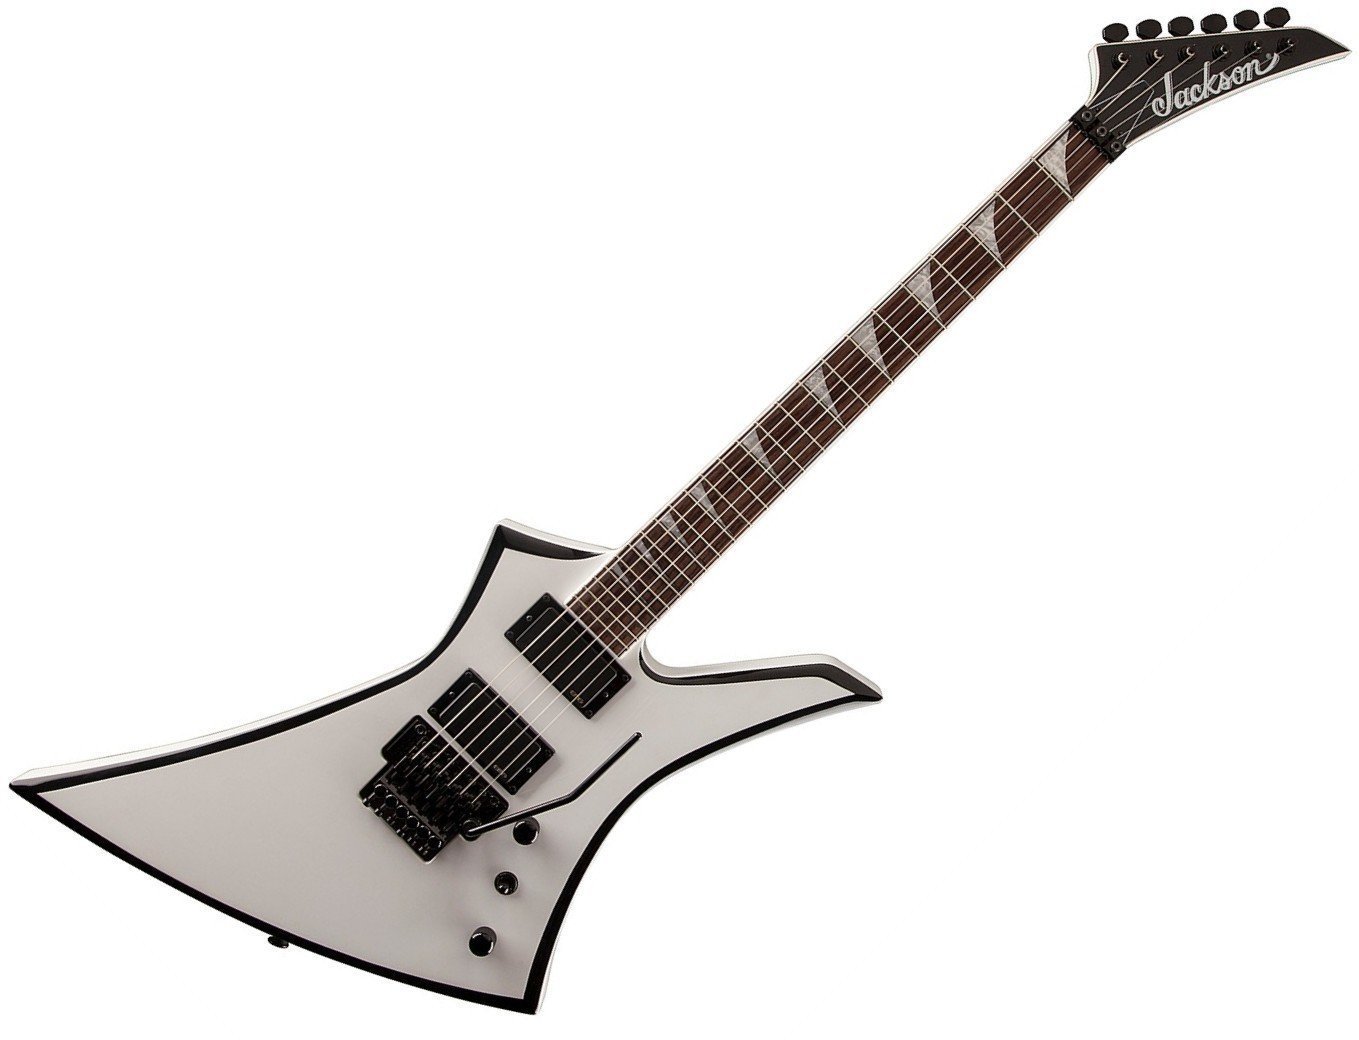 Electric guitar Jackson KEXMG Kelly White with Black Bevels